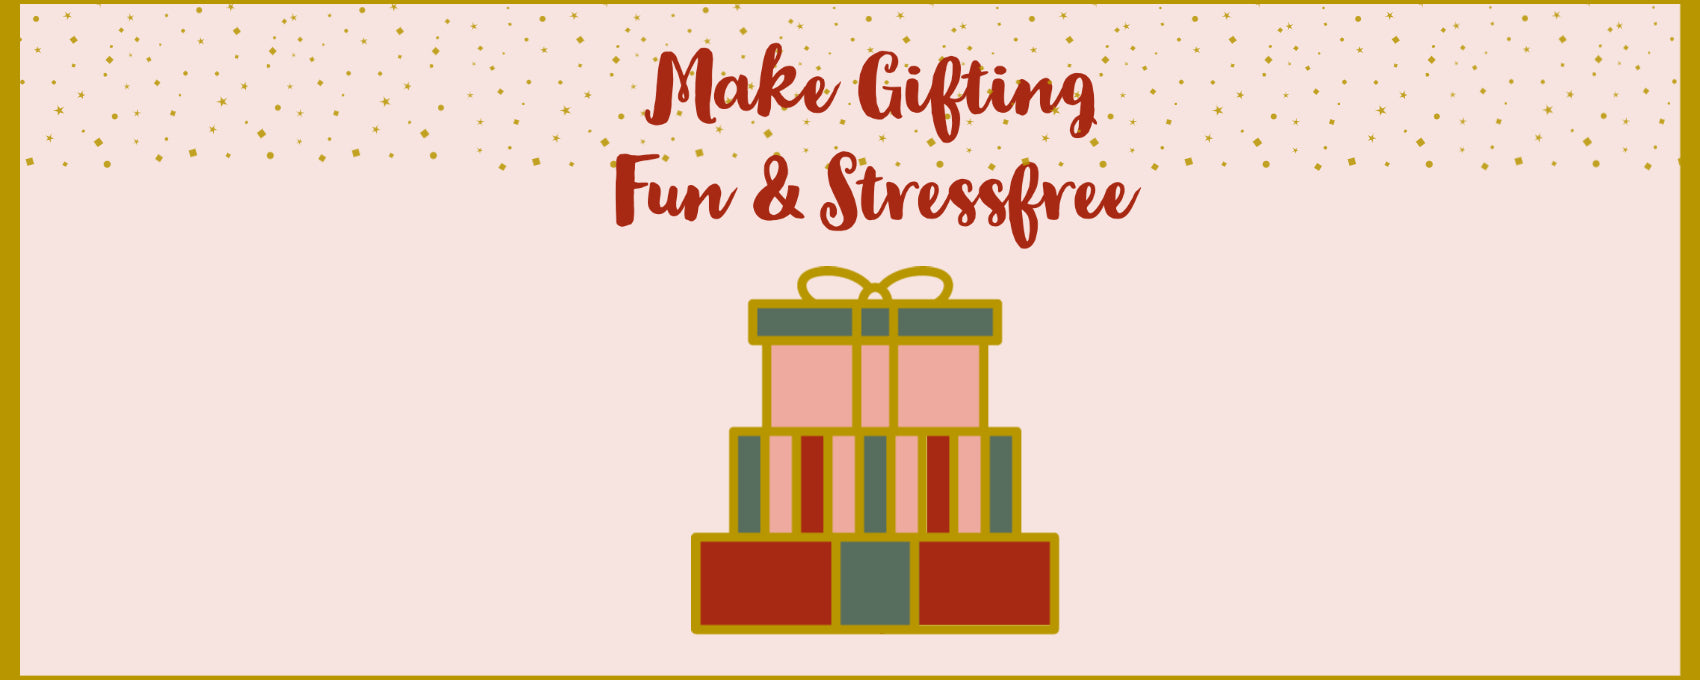 Gift Giving Made Easy & Meaningful